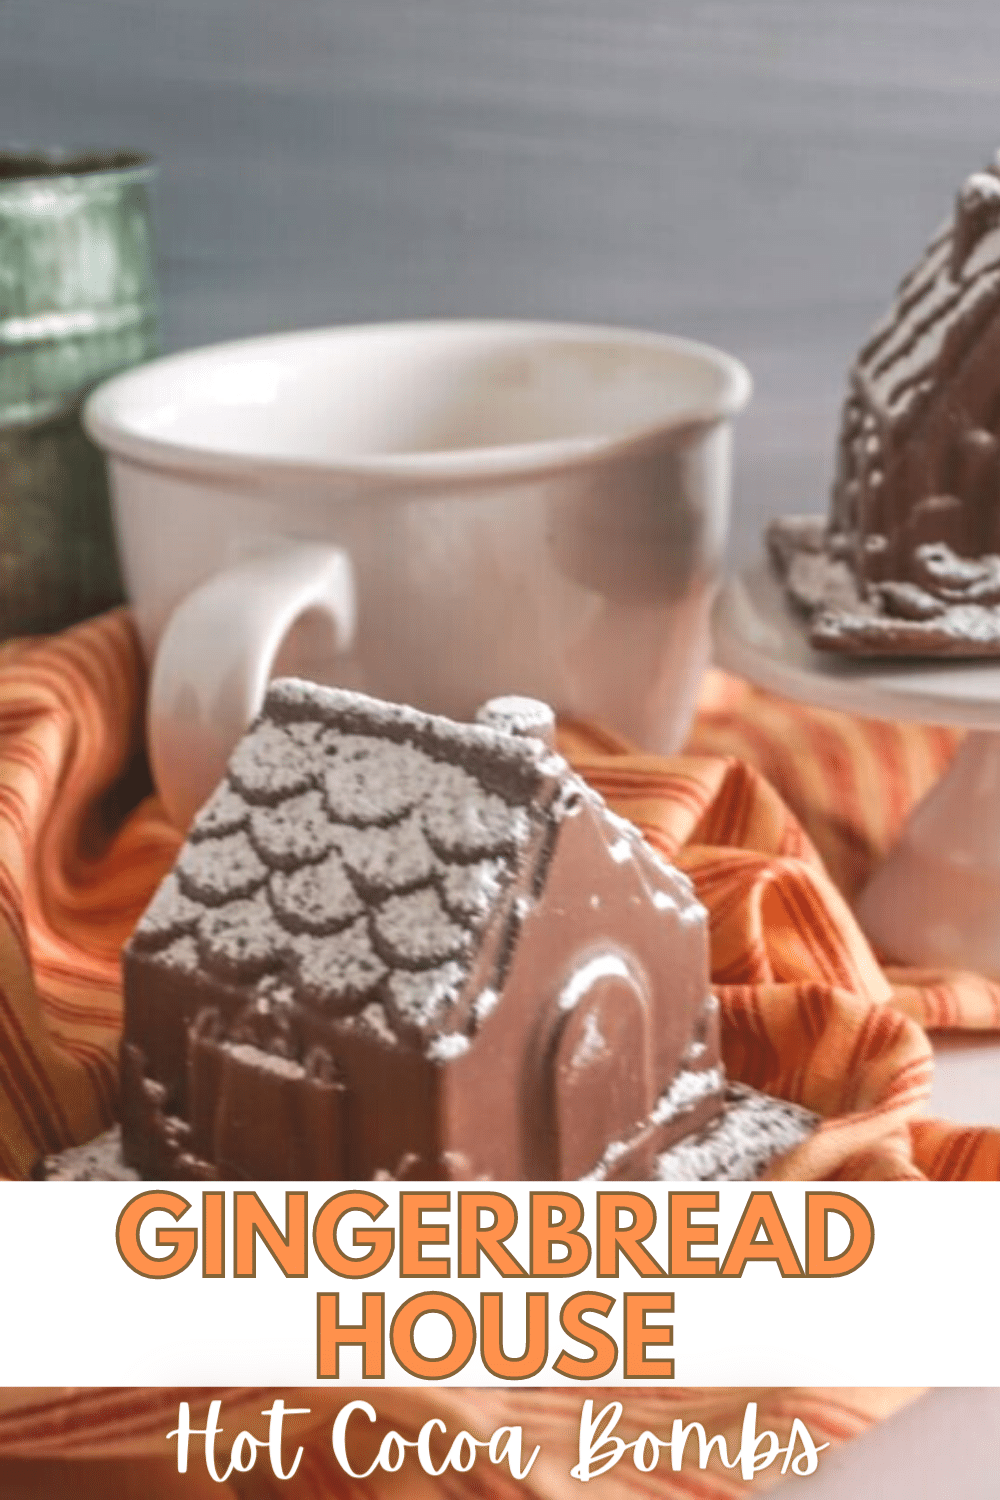 These Gingerbread House Hot Cocoa Bombs are unlike any cocoa bomb you're ever seen! So simple and delicious! #hotcocoabombs #hotcocoa #gingerbreadhouse #christmas via @wondermomwannab